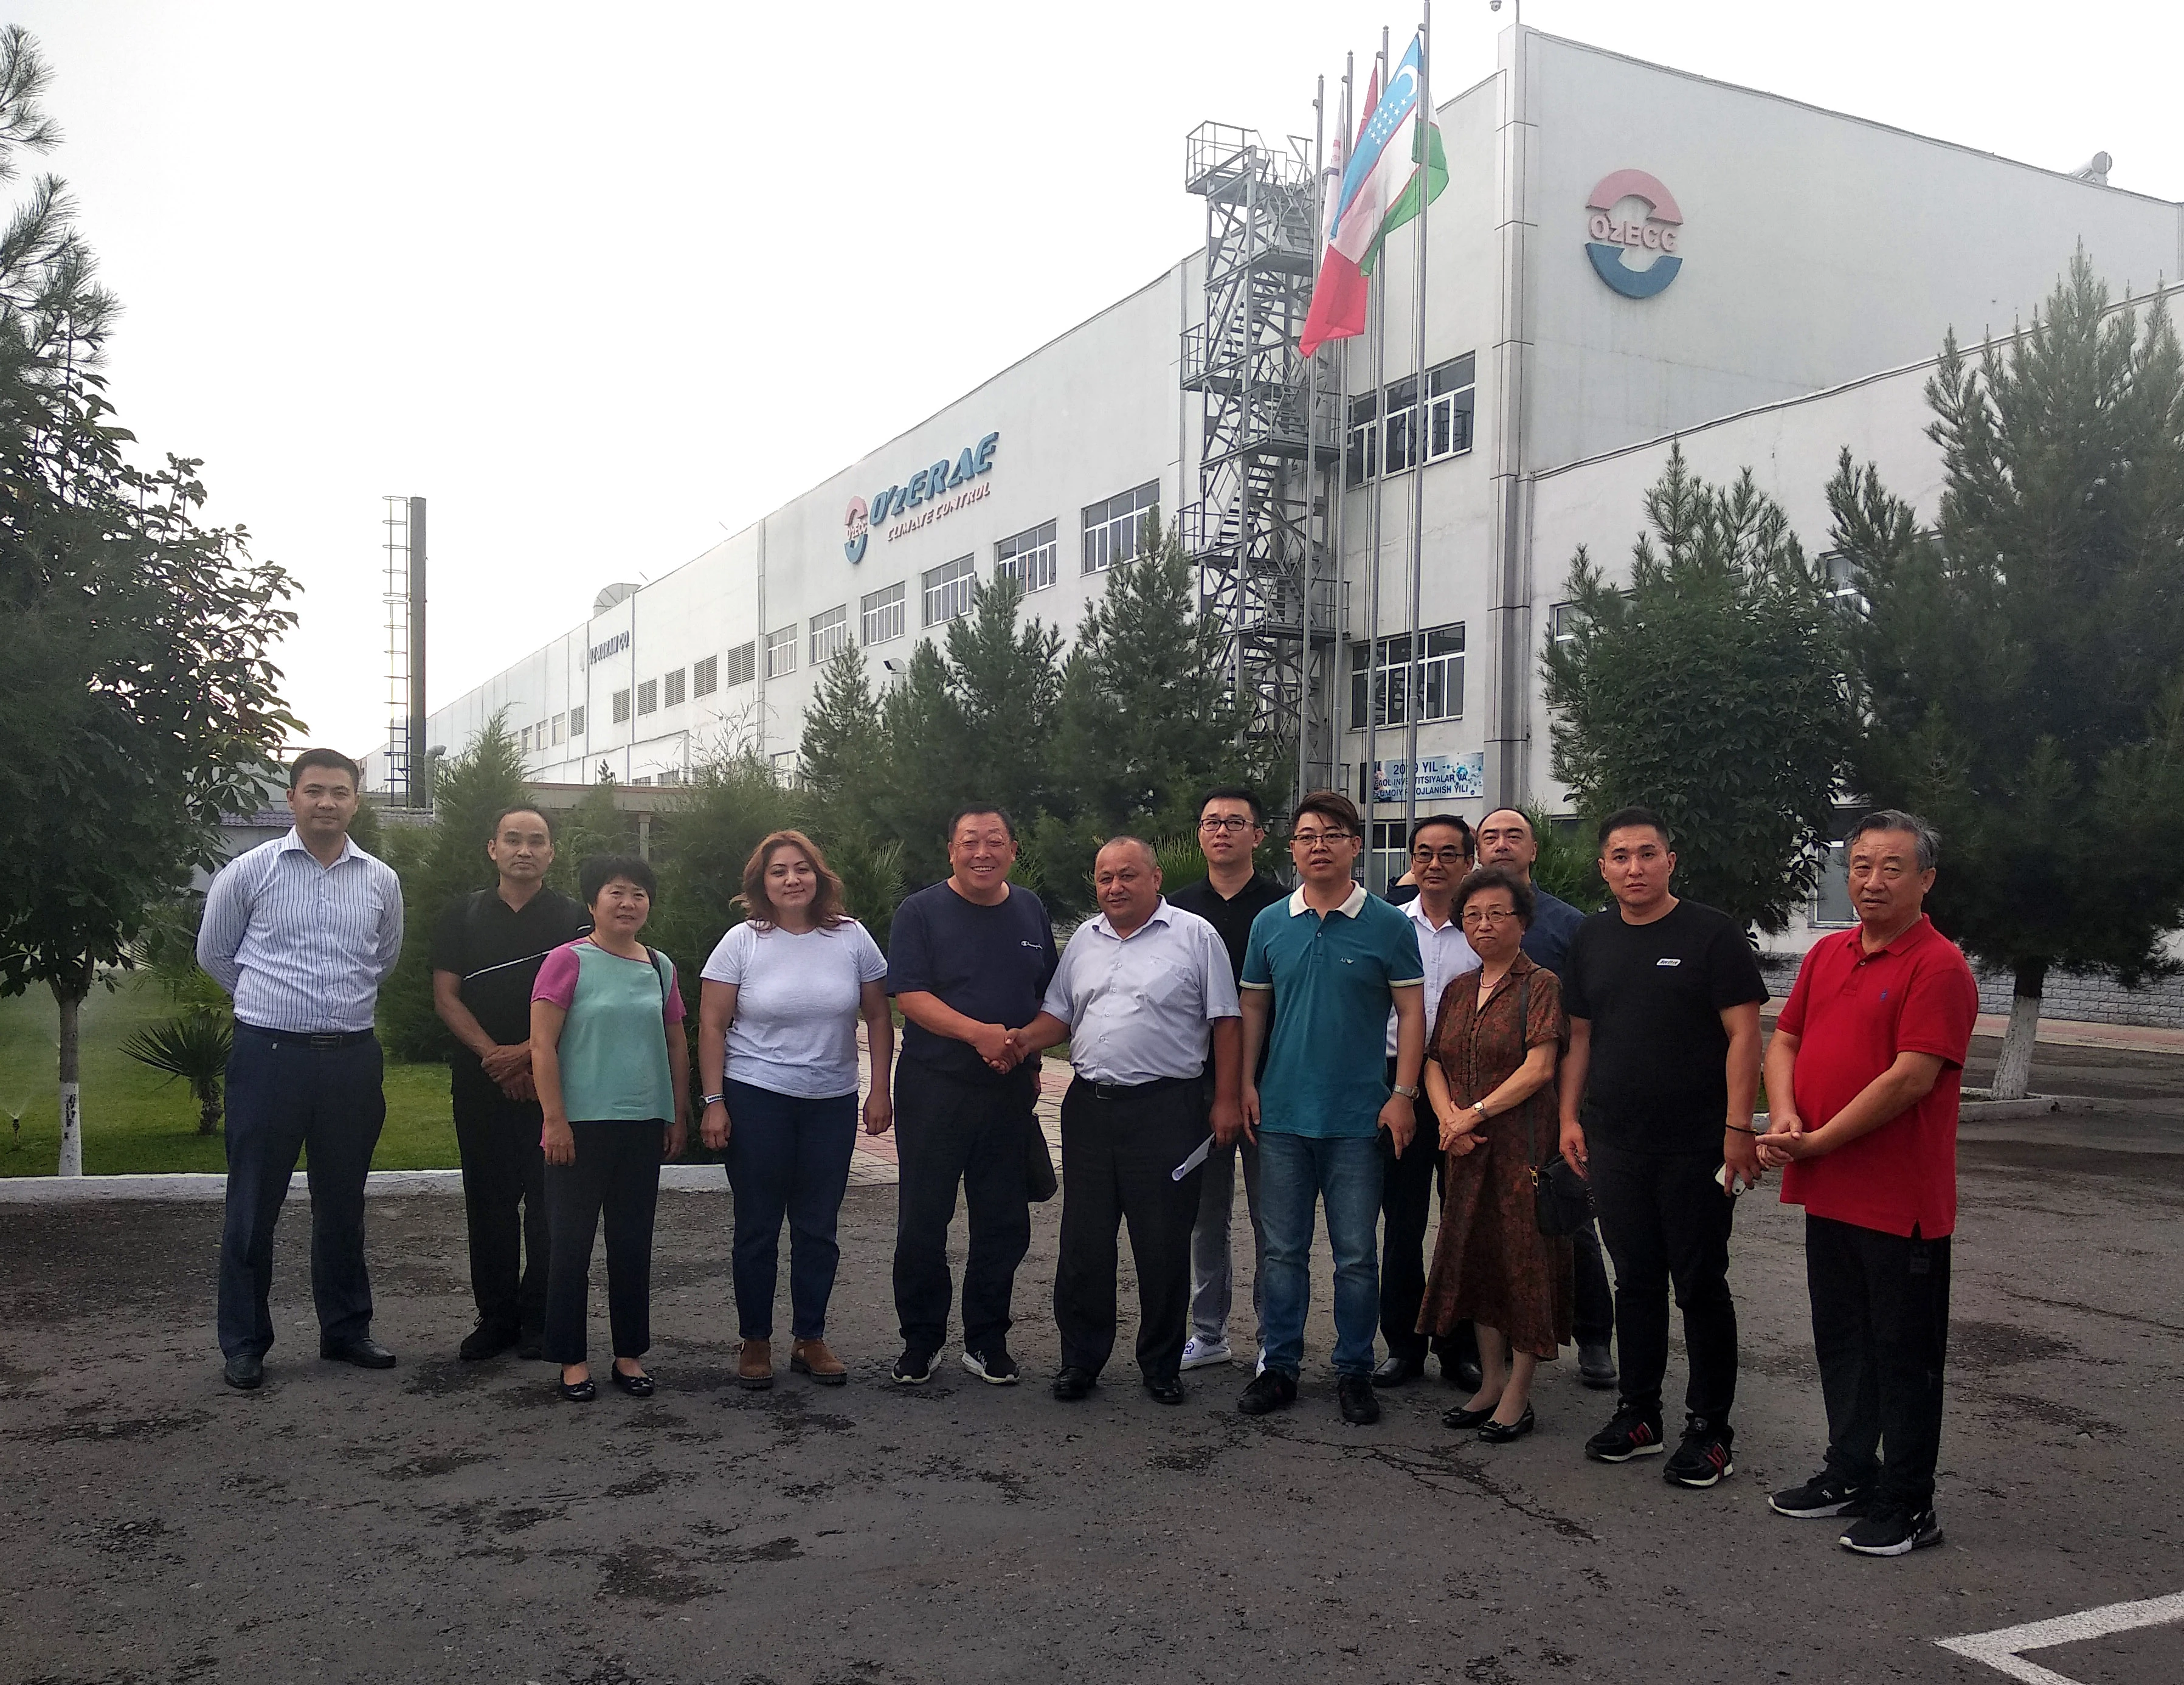 ON JULY 03, 2019, MR. HUA XING MU, CEO OF THE CHINESE COMPANY TIANJIN CHINA RADIATOR CO., LTD., VISITED OUR COMPANY FOR INVESTMENT PURPOSES.